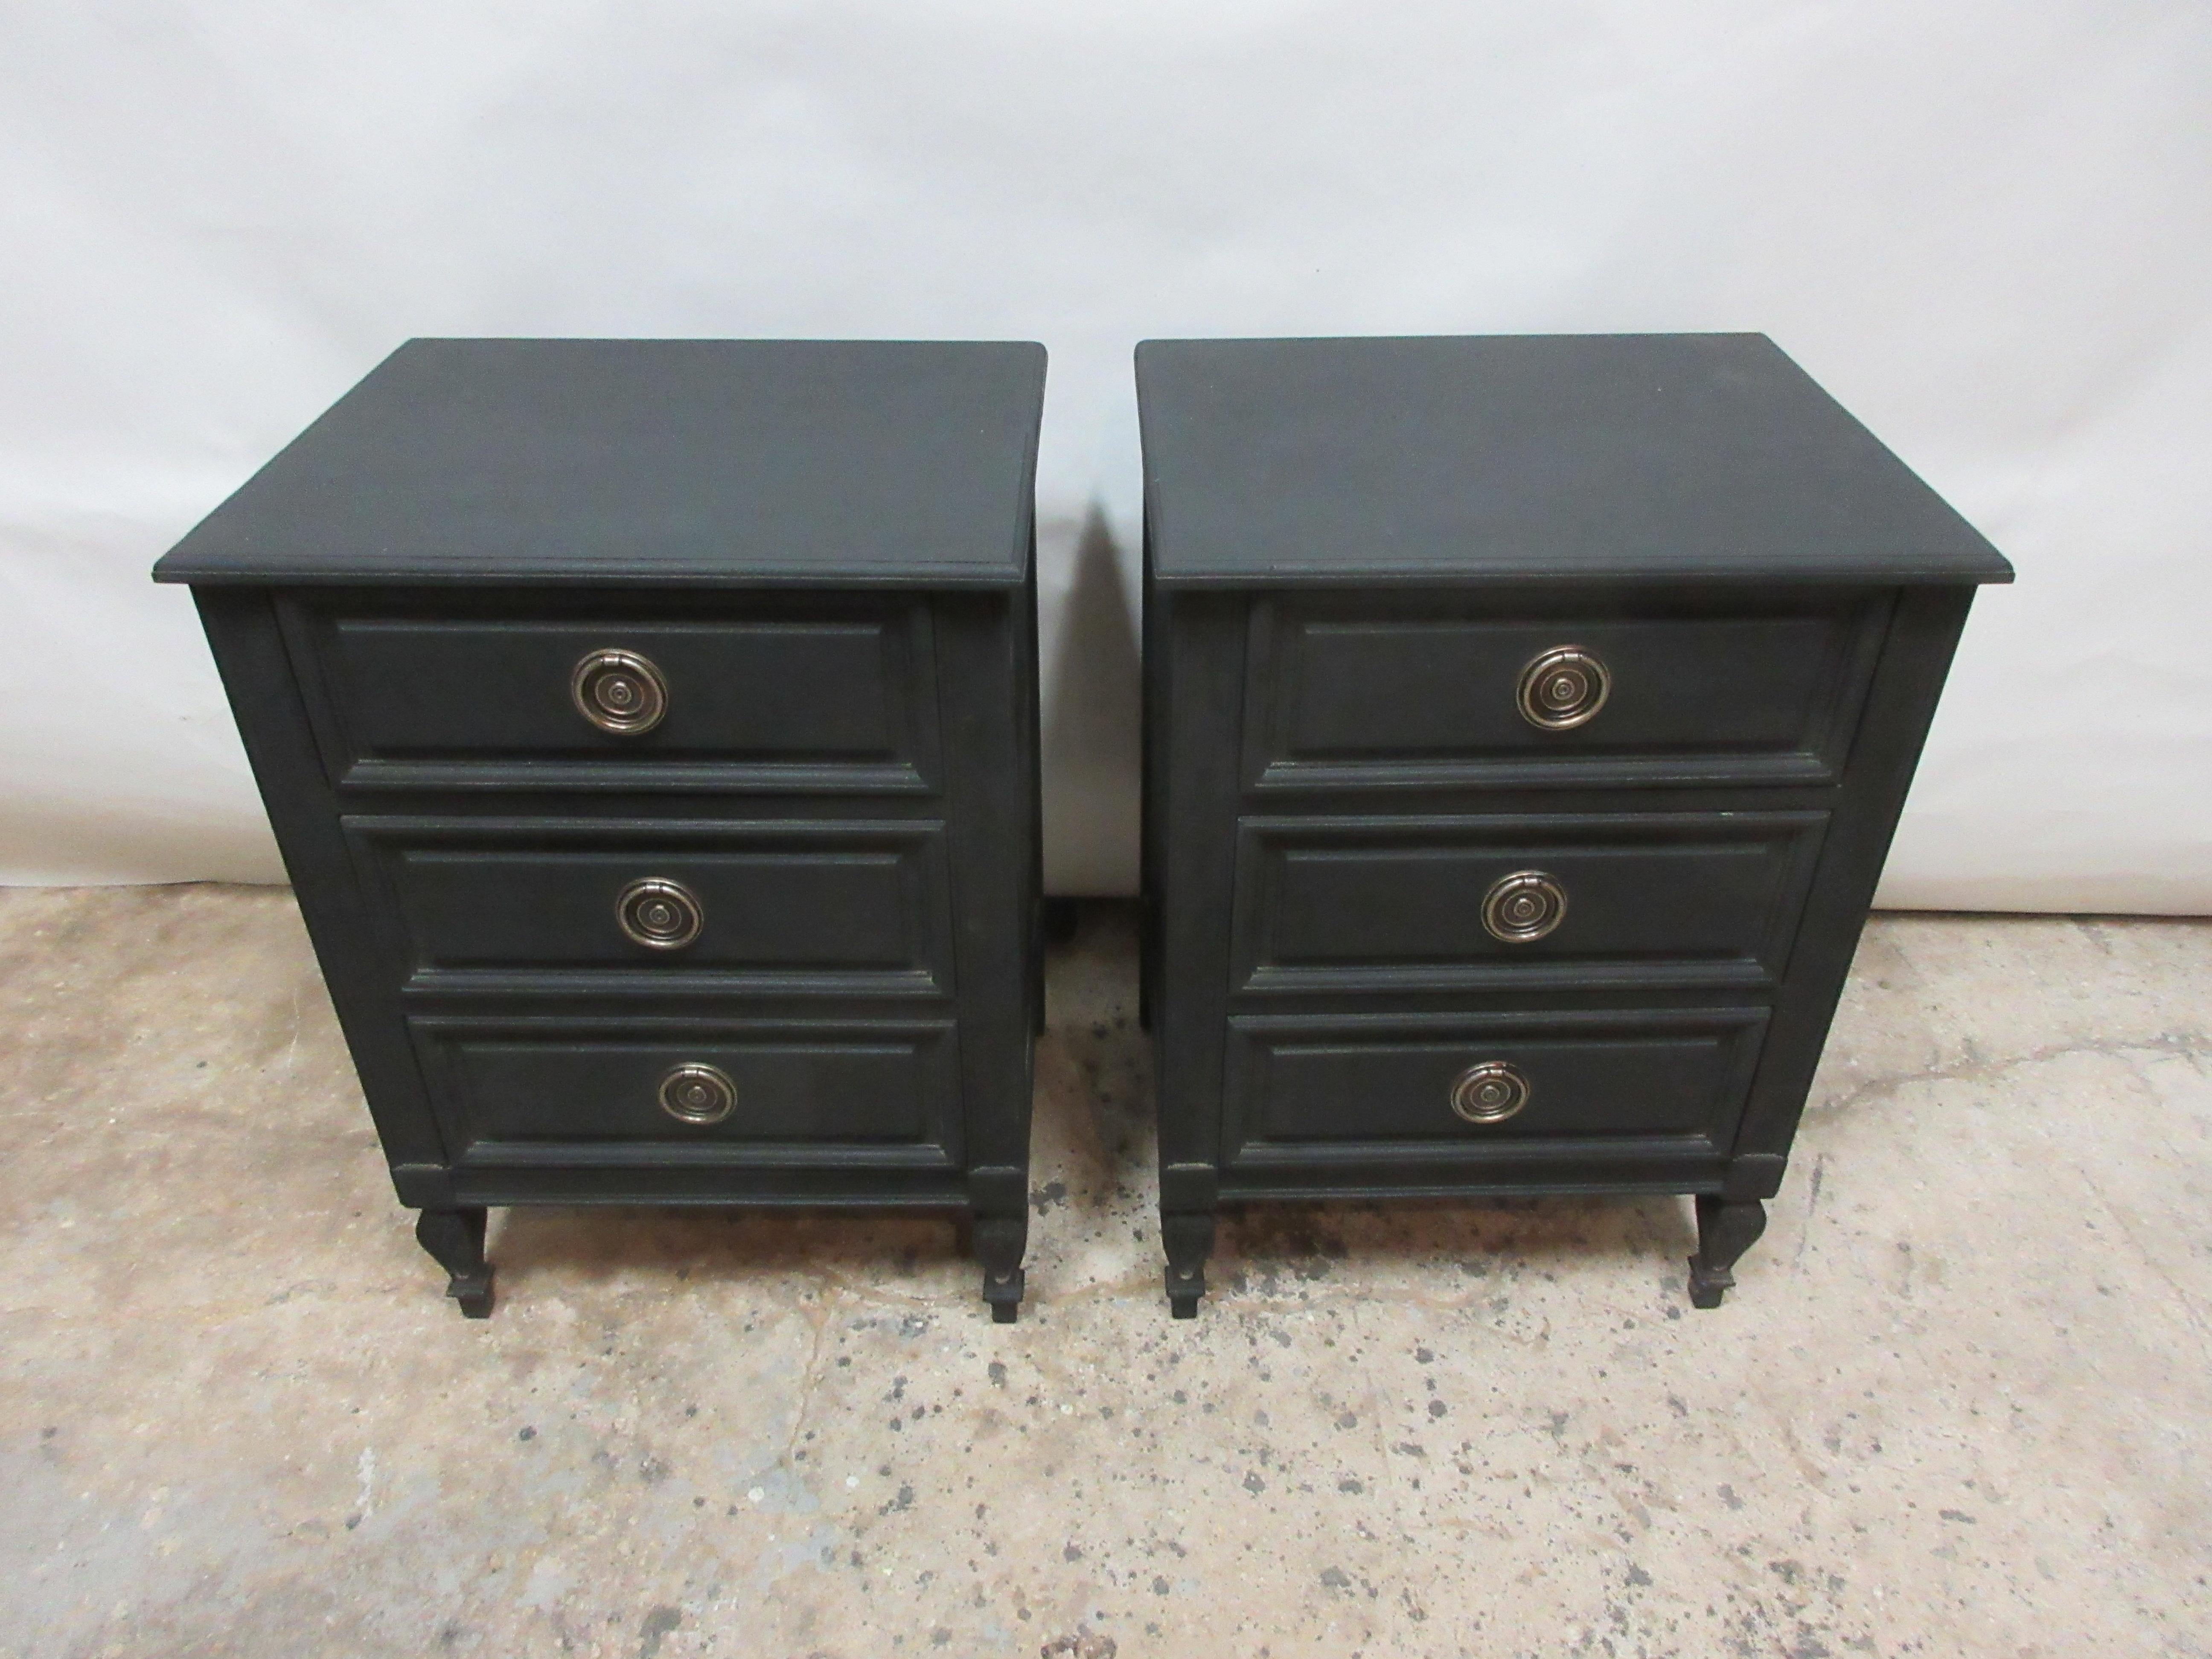 This is a set of 2 Swedish Gustavian nightstands. They have been restored and repainted with milk paints 